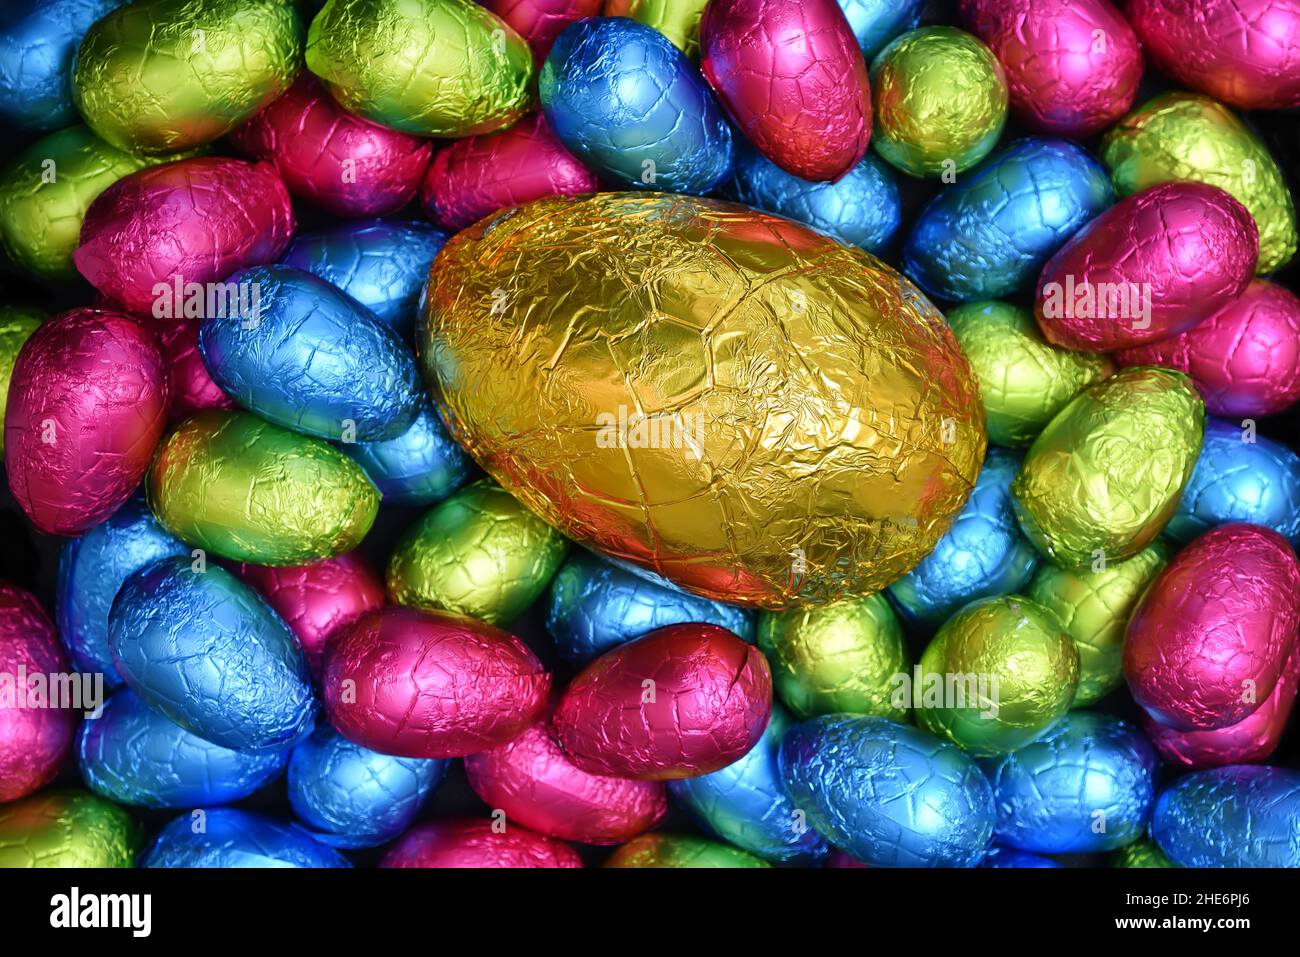 Pile or group of multi coloured and different sizes of colourful foil wrapped chocolate easter eggs in pink, blue, yellow and lime green. Stock Photo